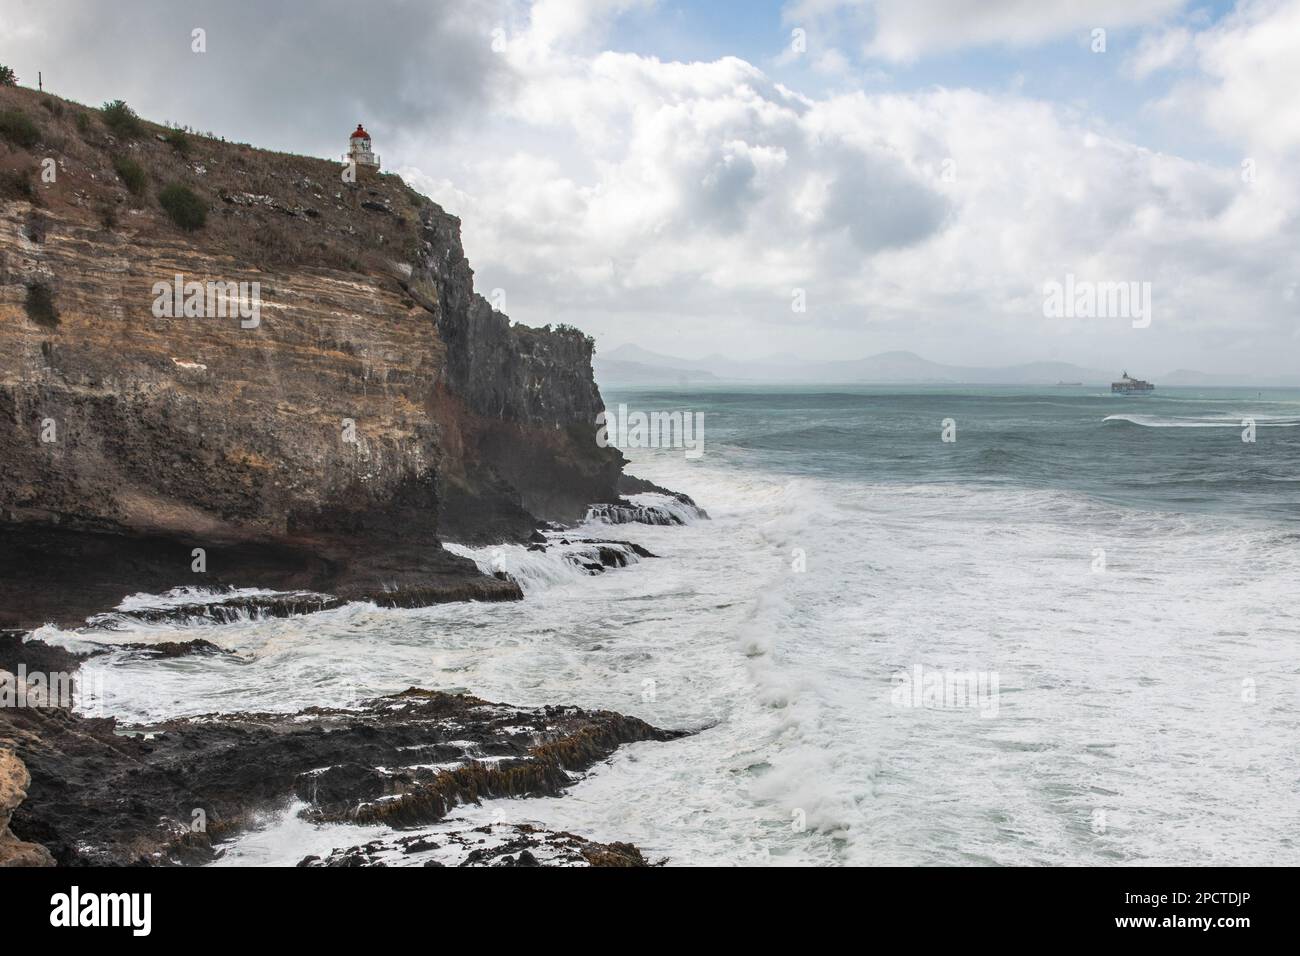 The cliffs at Taiaroa Head at the end of the Otago peninsula in New Zealand where the headland dramatically juts into the Pacific Ocean. Stock Photo